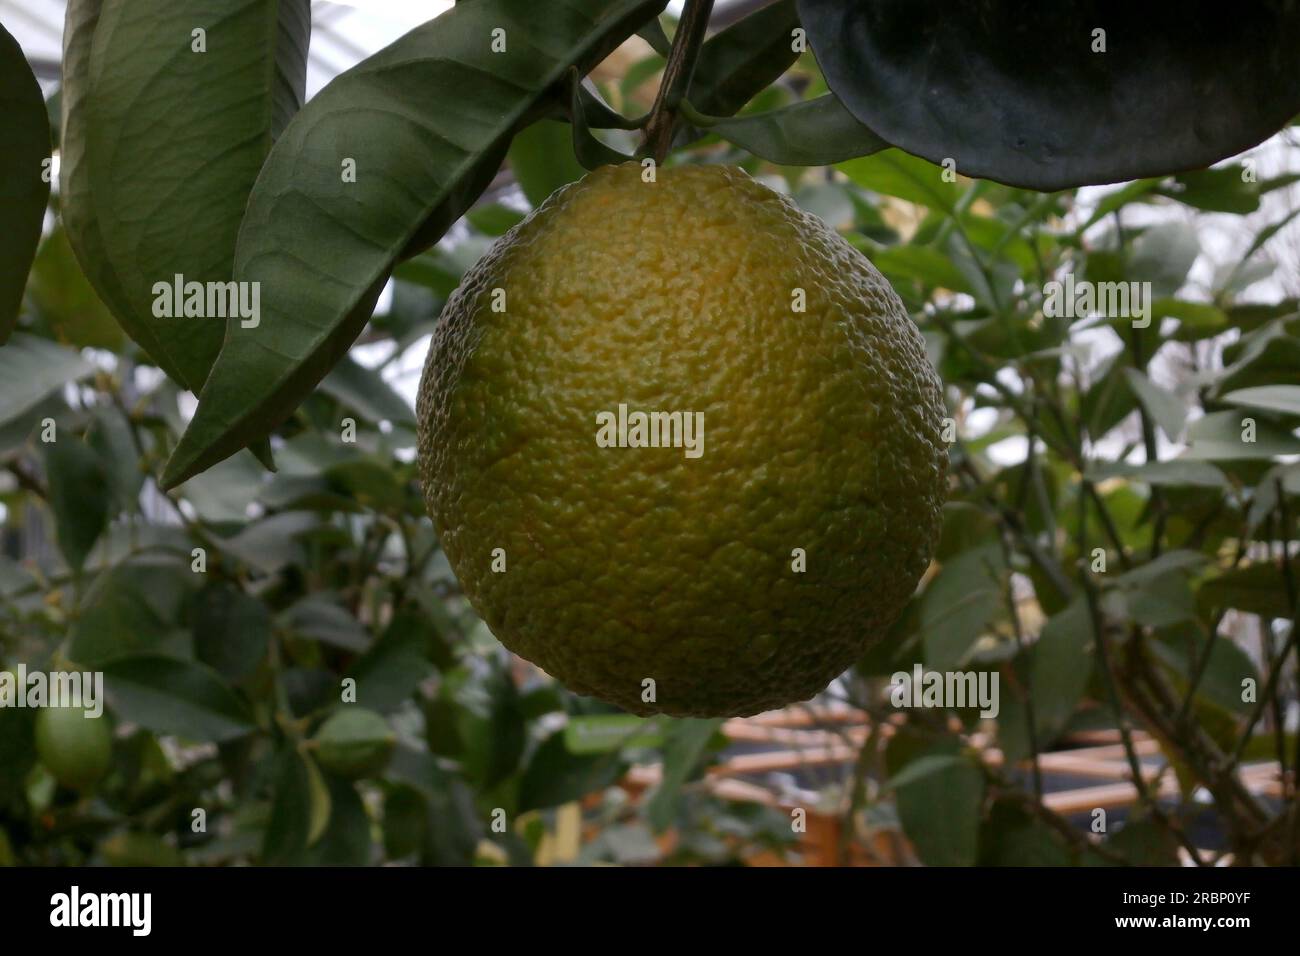 Close-up on an imature orange (citrus sinensis) in a tree. Stock Photo